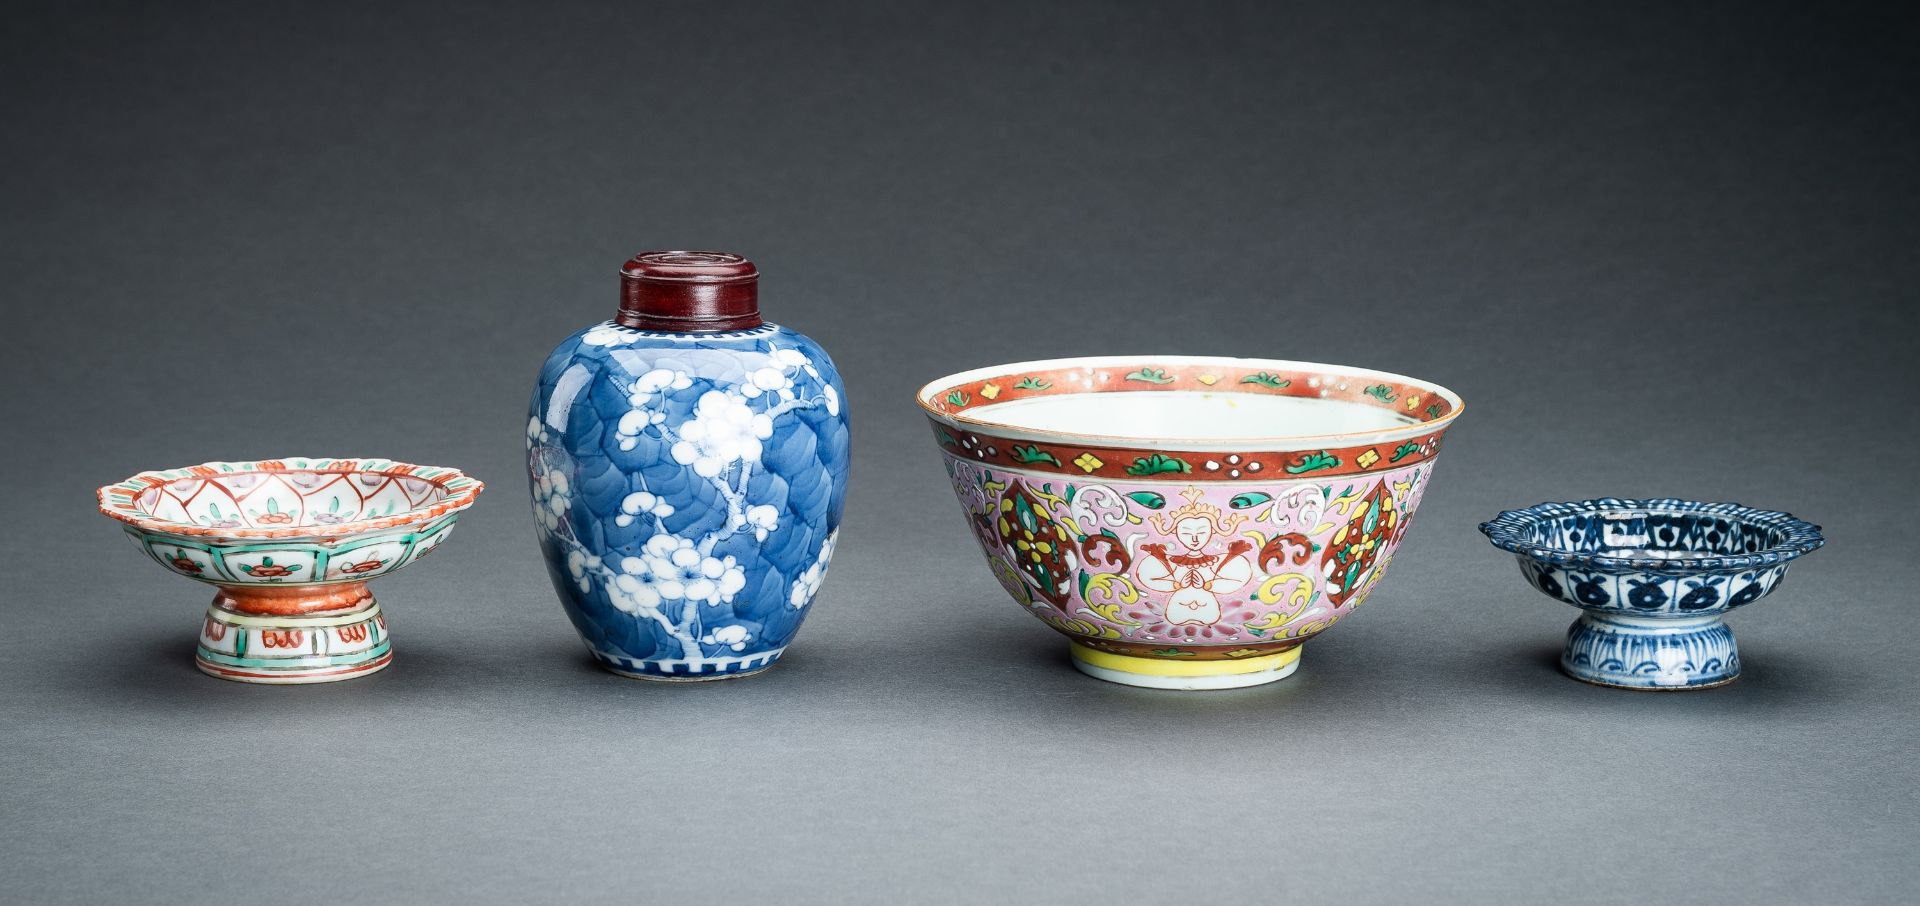 A GROUP OF FOUR PORCELAIN ITEMS, QING